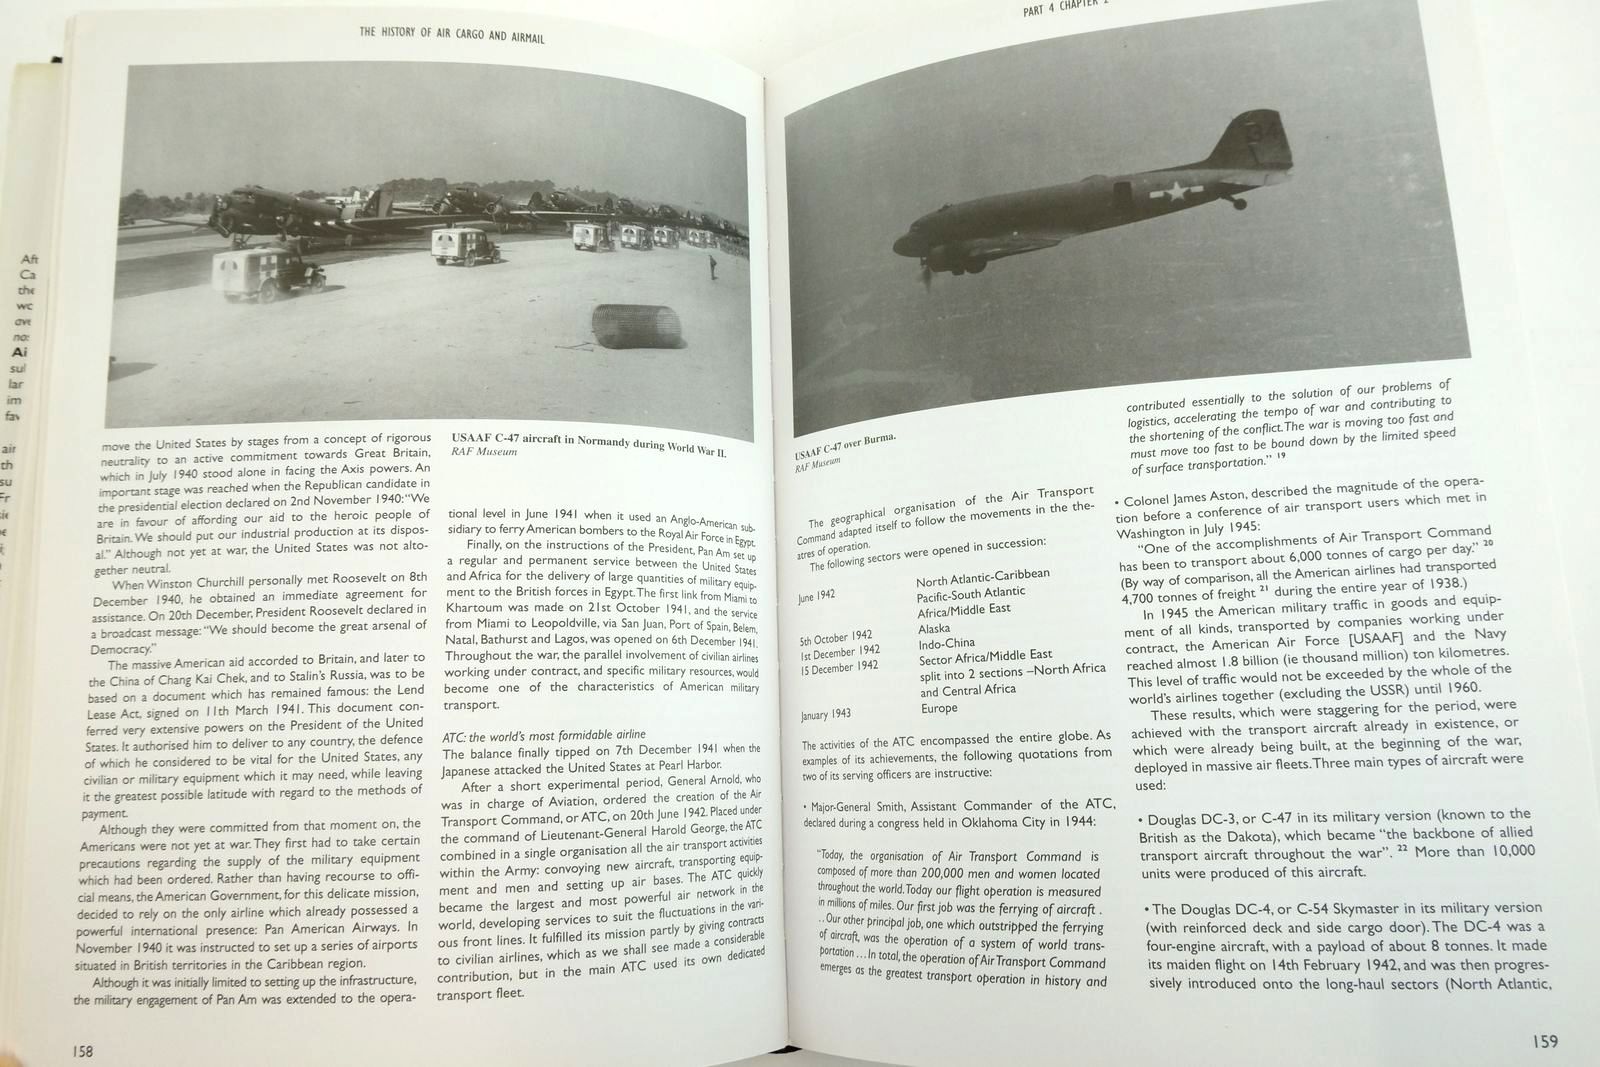 Photo of THE HISTORY OF AIR CARGO AND AIRMAIL FROM THE 18TH CENTURY written by Allaz, Camille published by Christopher Foyle Publishing (STOCK CODE: 2136495)  for sale by Stella & Rose's Books